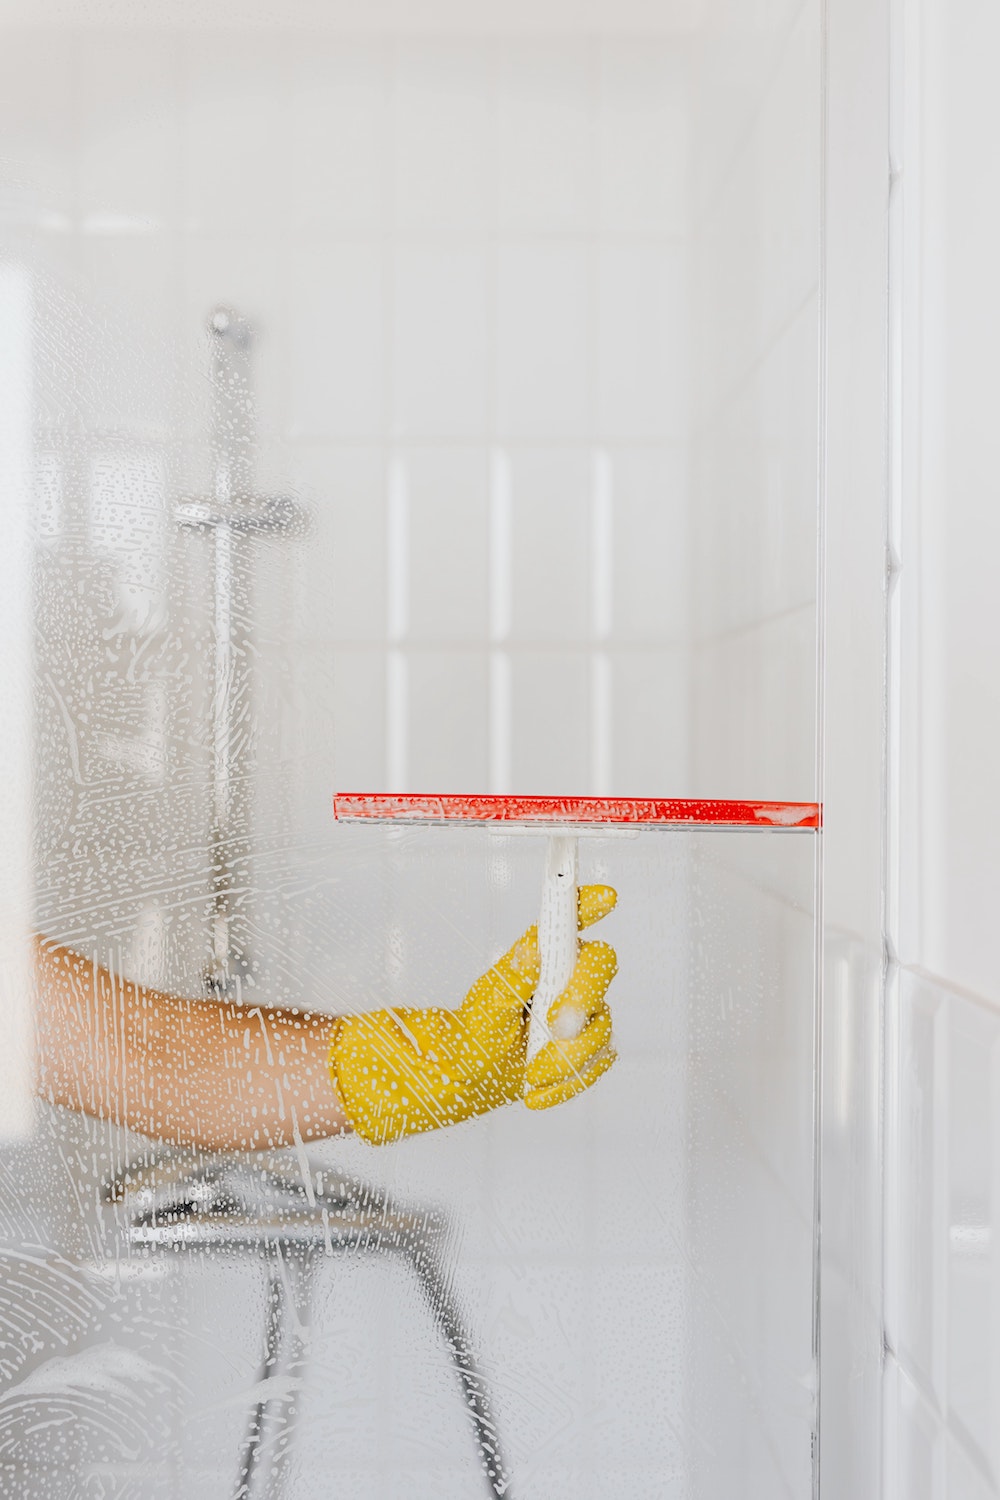 How to Keep Your Shower Clean - Rain-X on Shower Glass! - unOriginal Mom